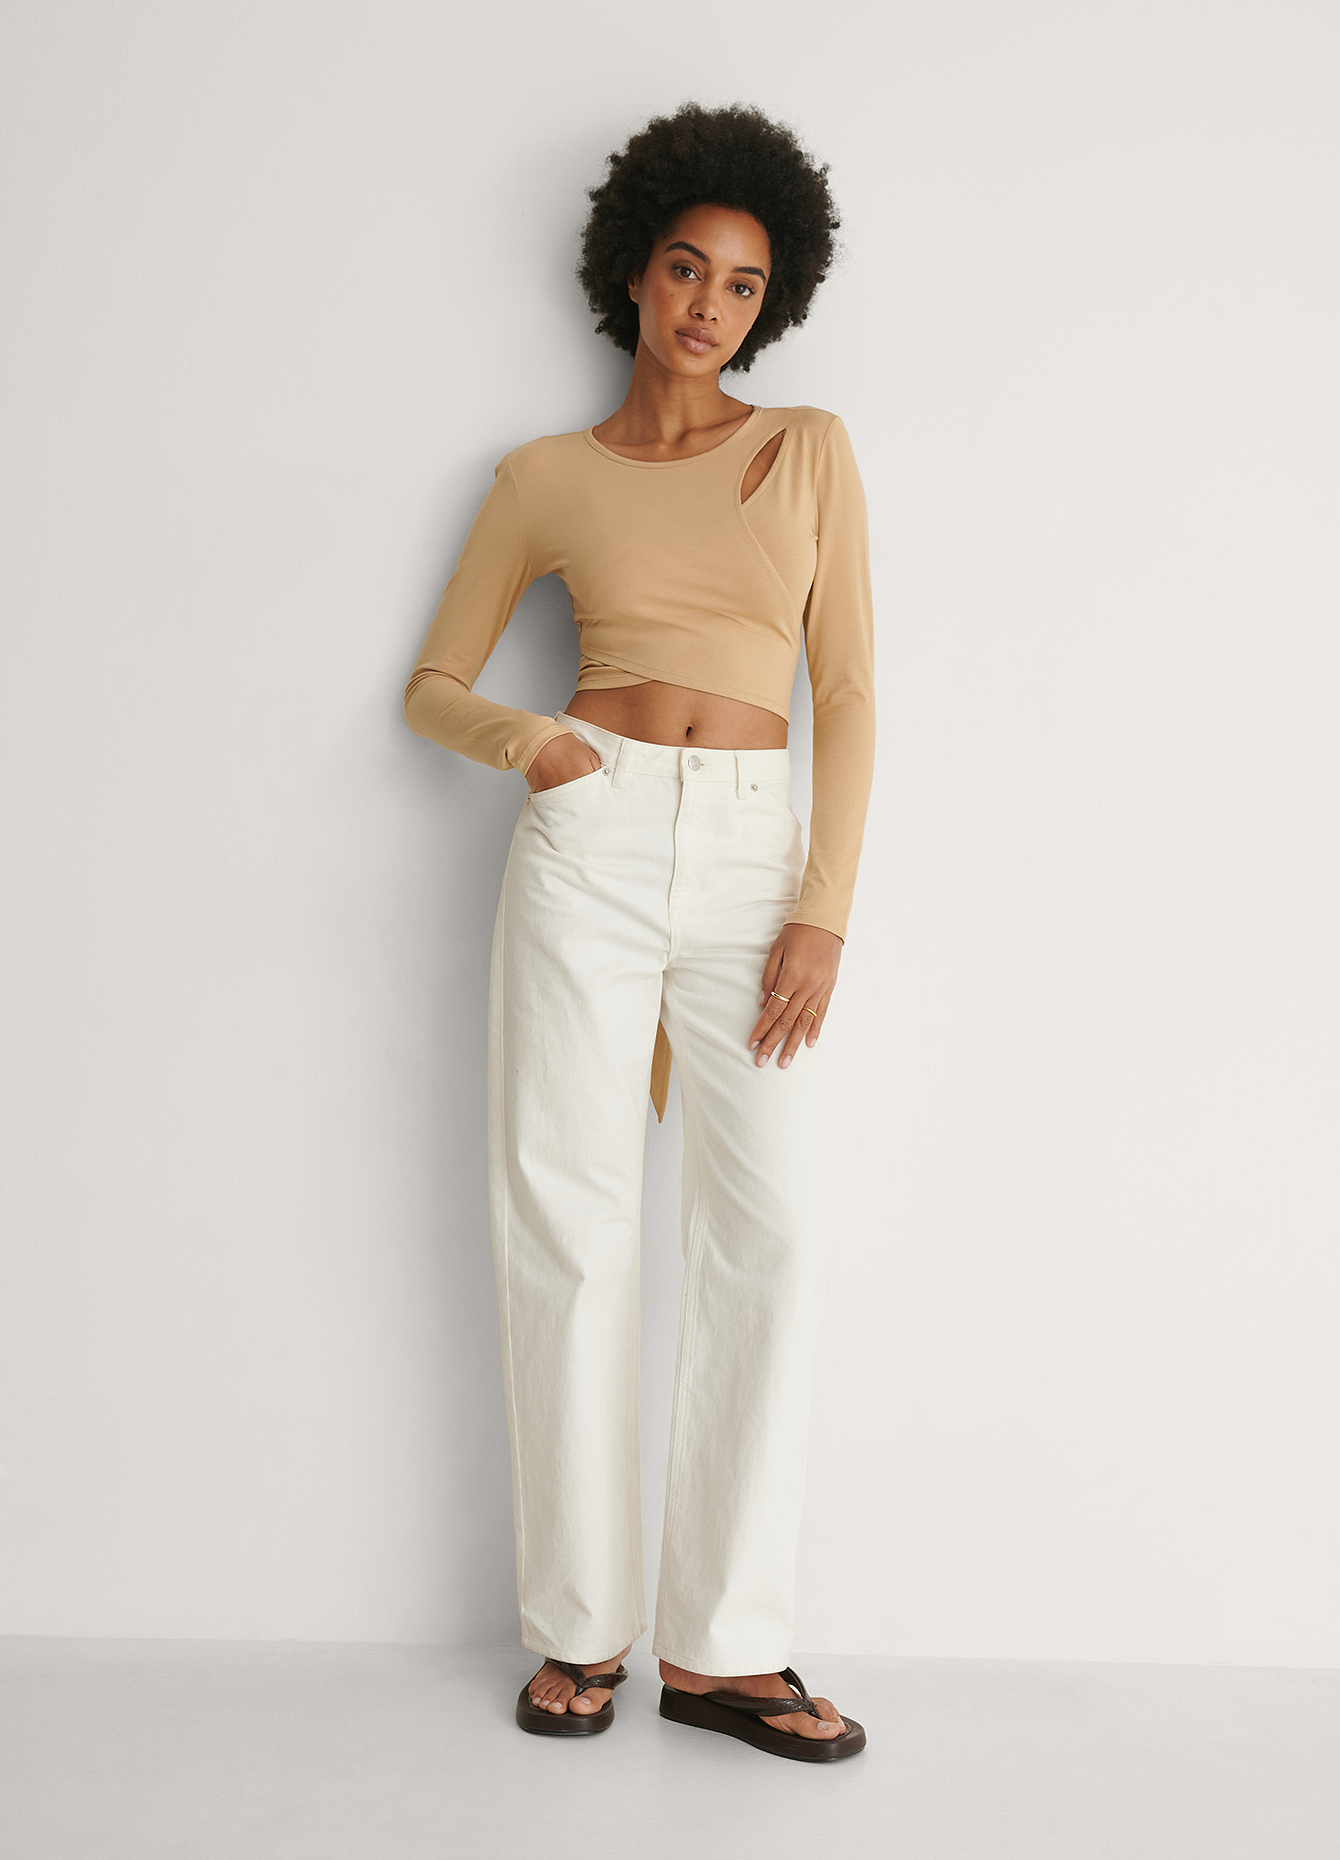 Organic Cotton Cut Out Tie Detail Top Outfit